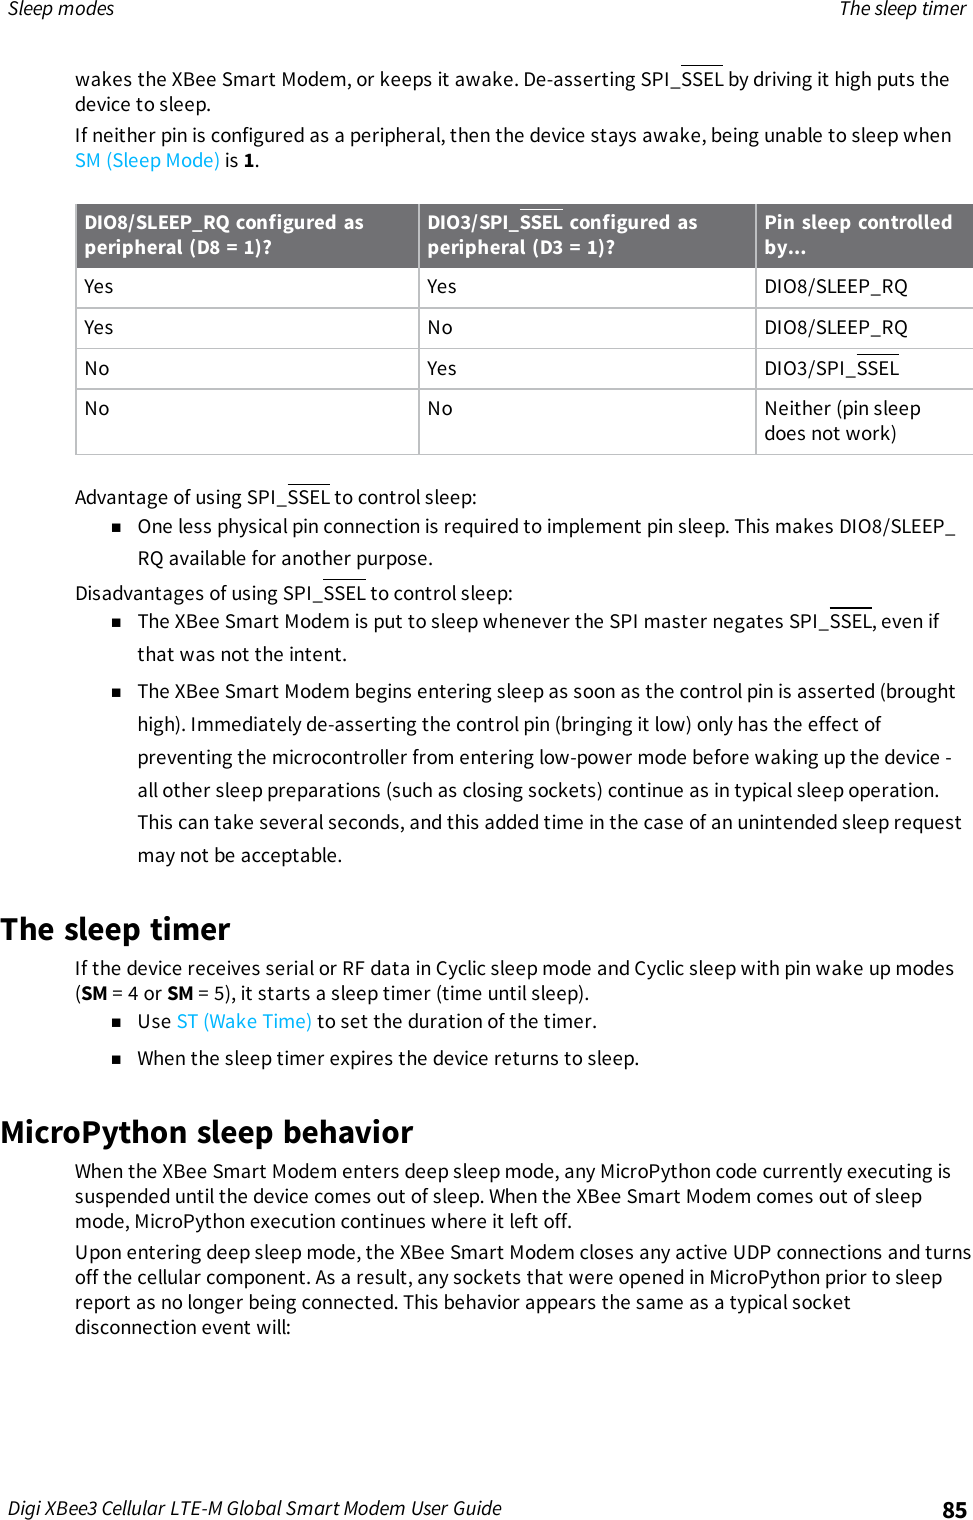 Page 85 of Digi XB3M1 XBee3 Cellular LTE-M User Manual 